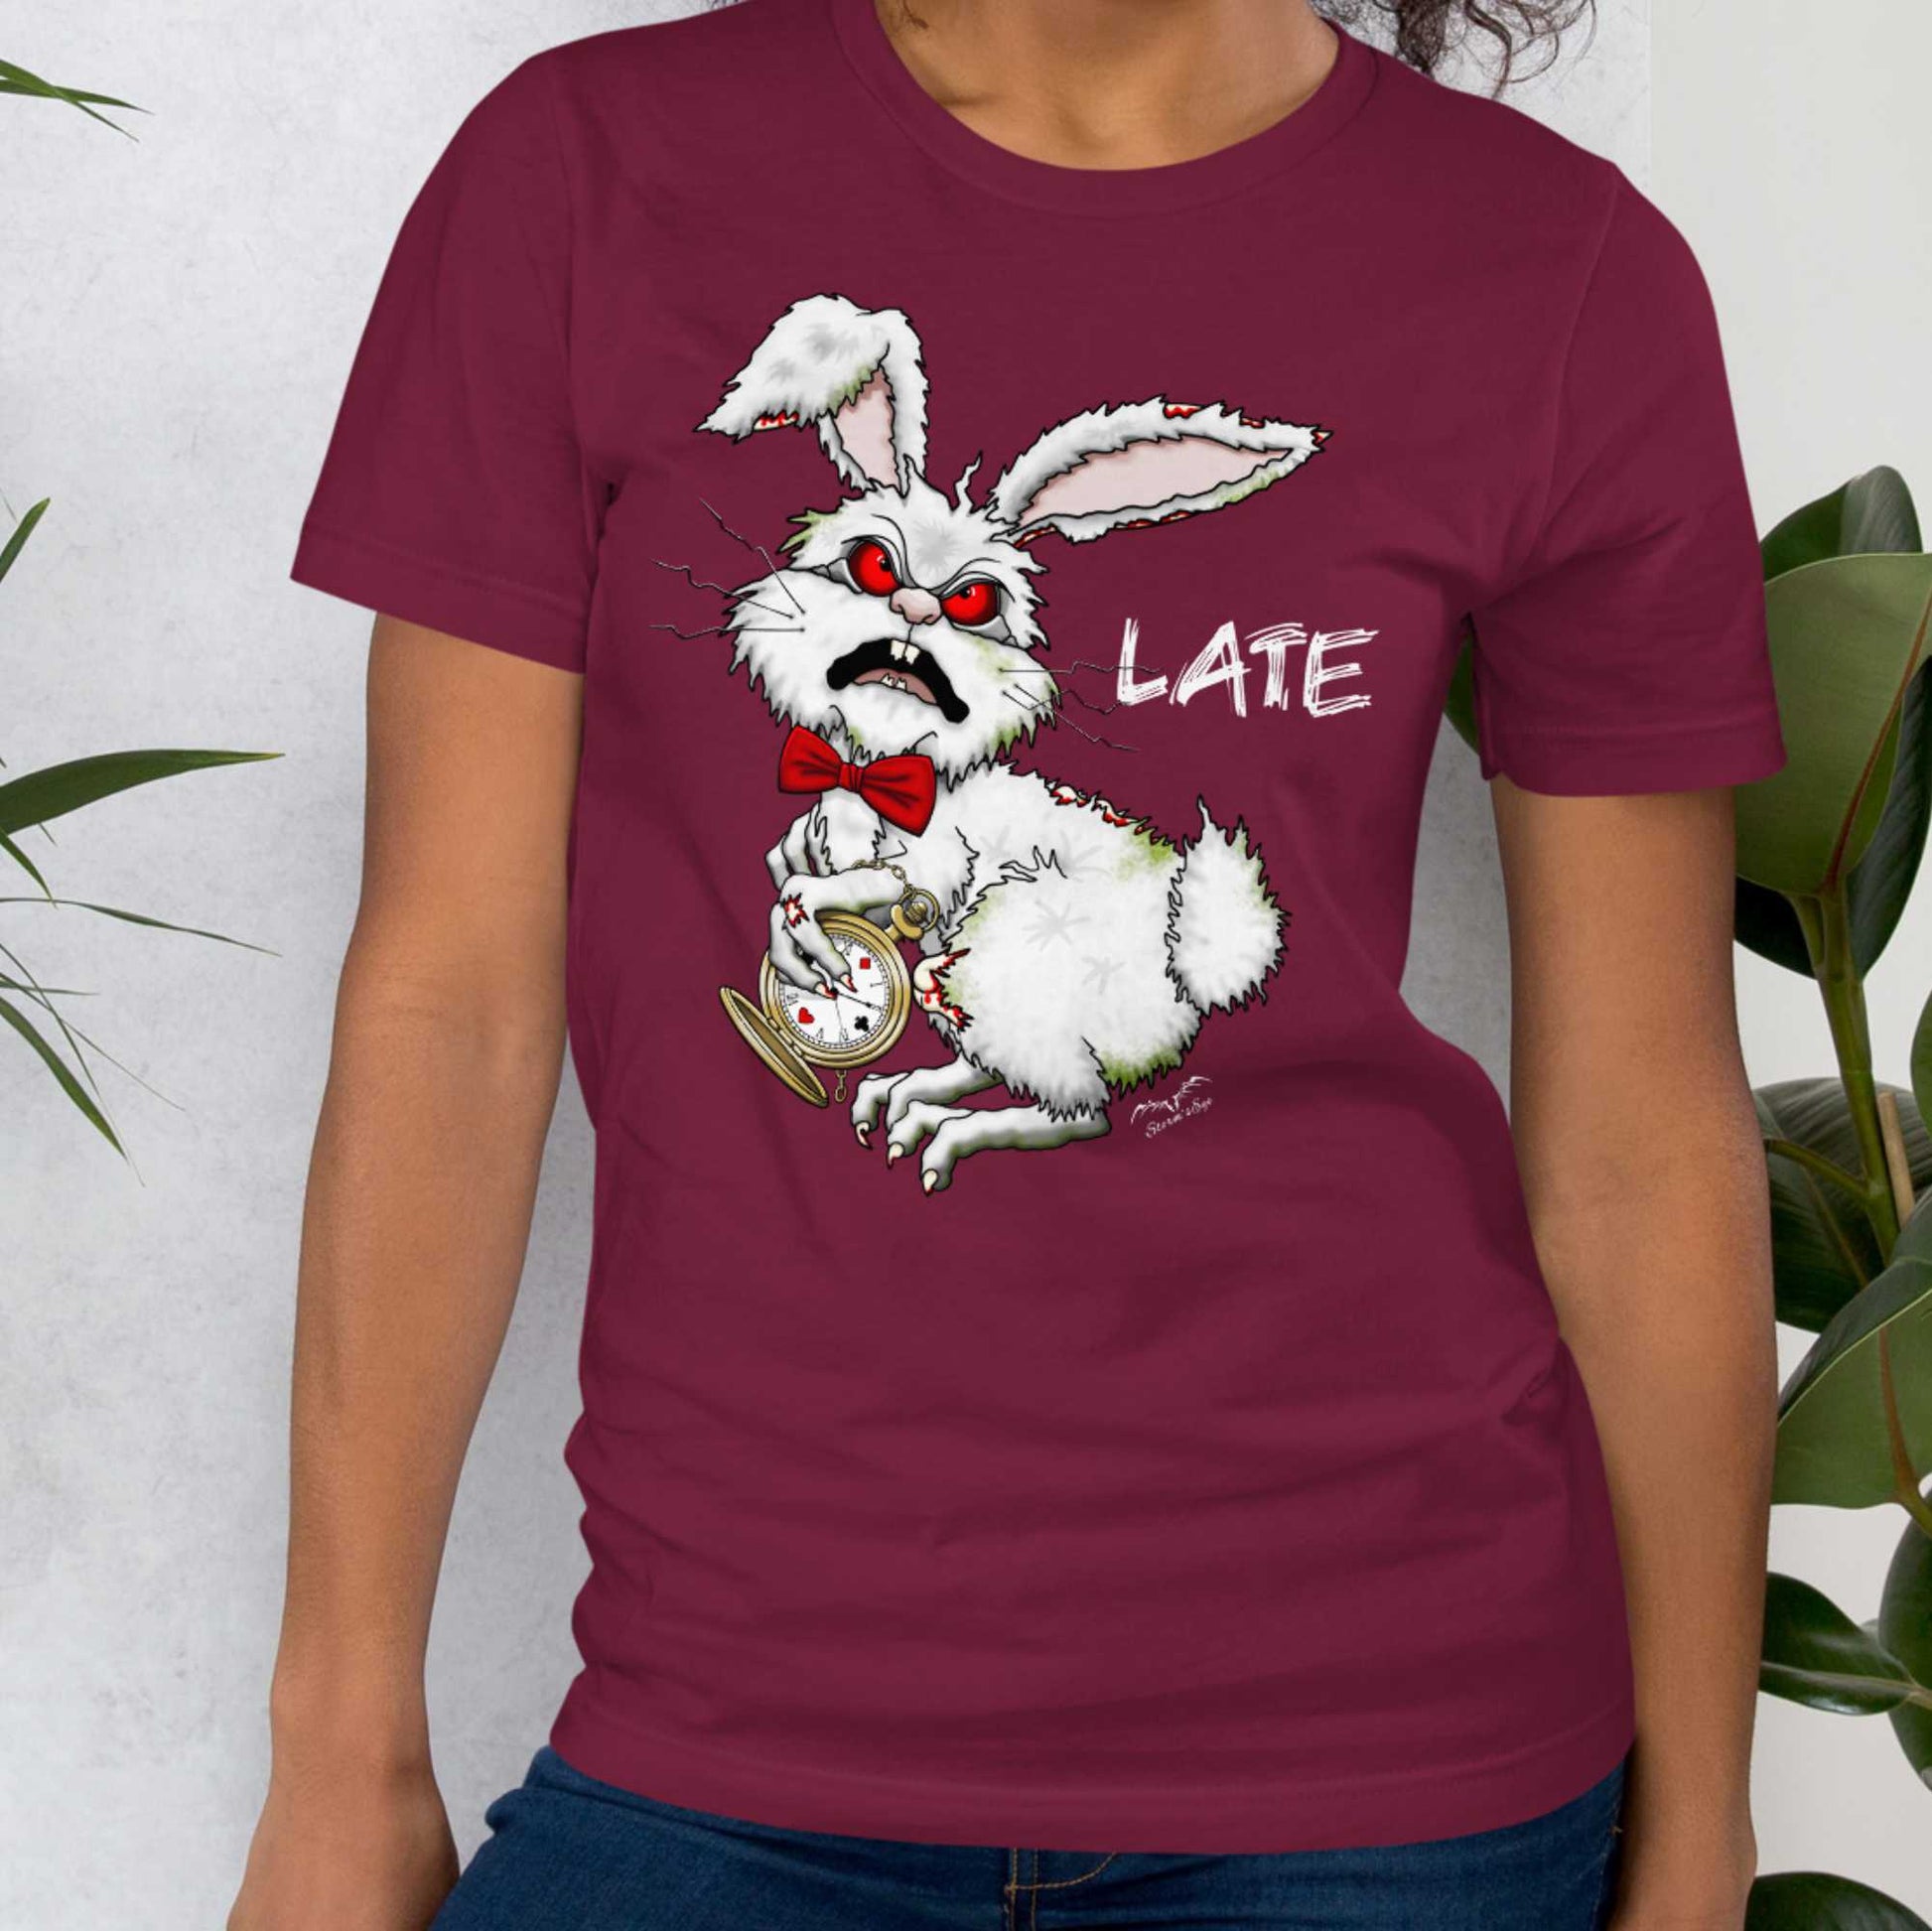 Stormseye Design zombie bunny t shirt, modelled view wine red